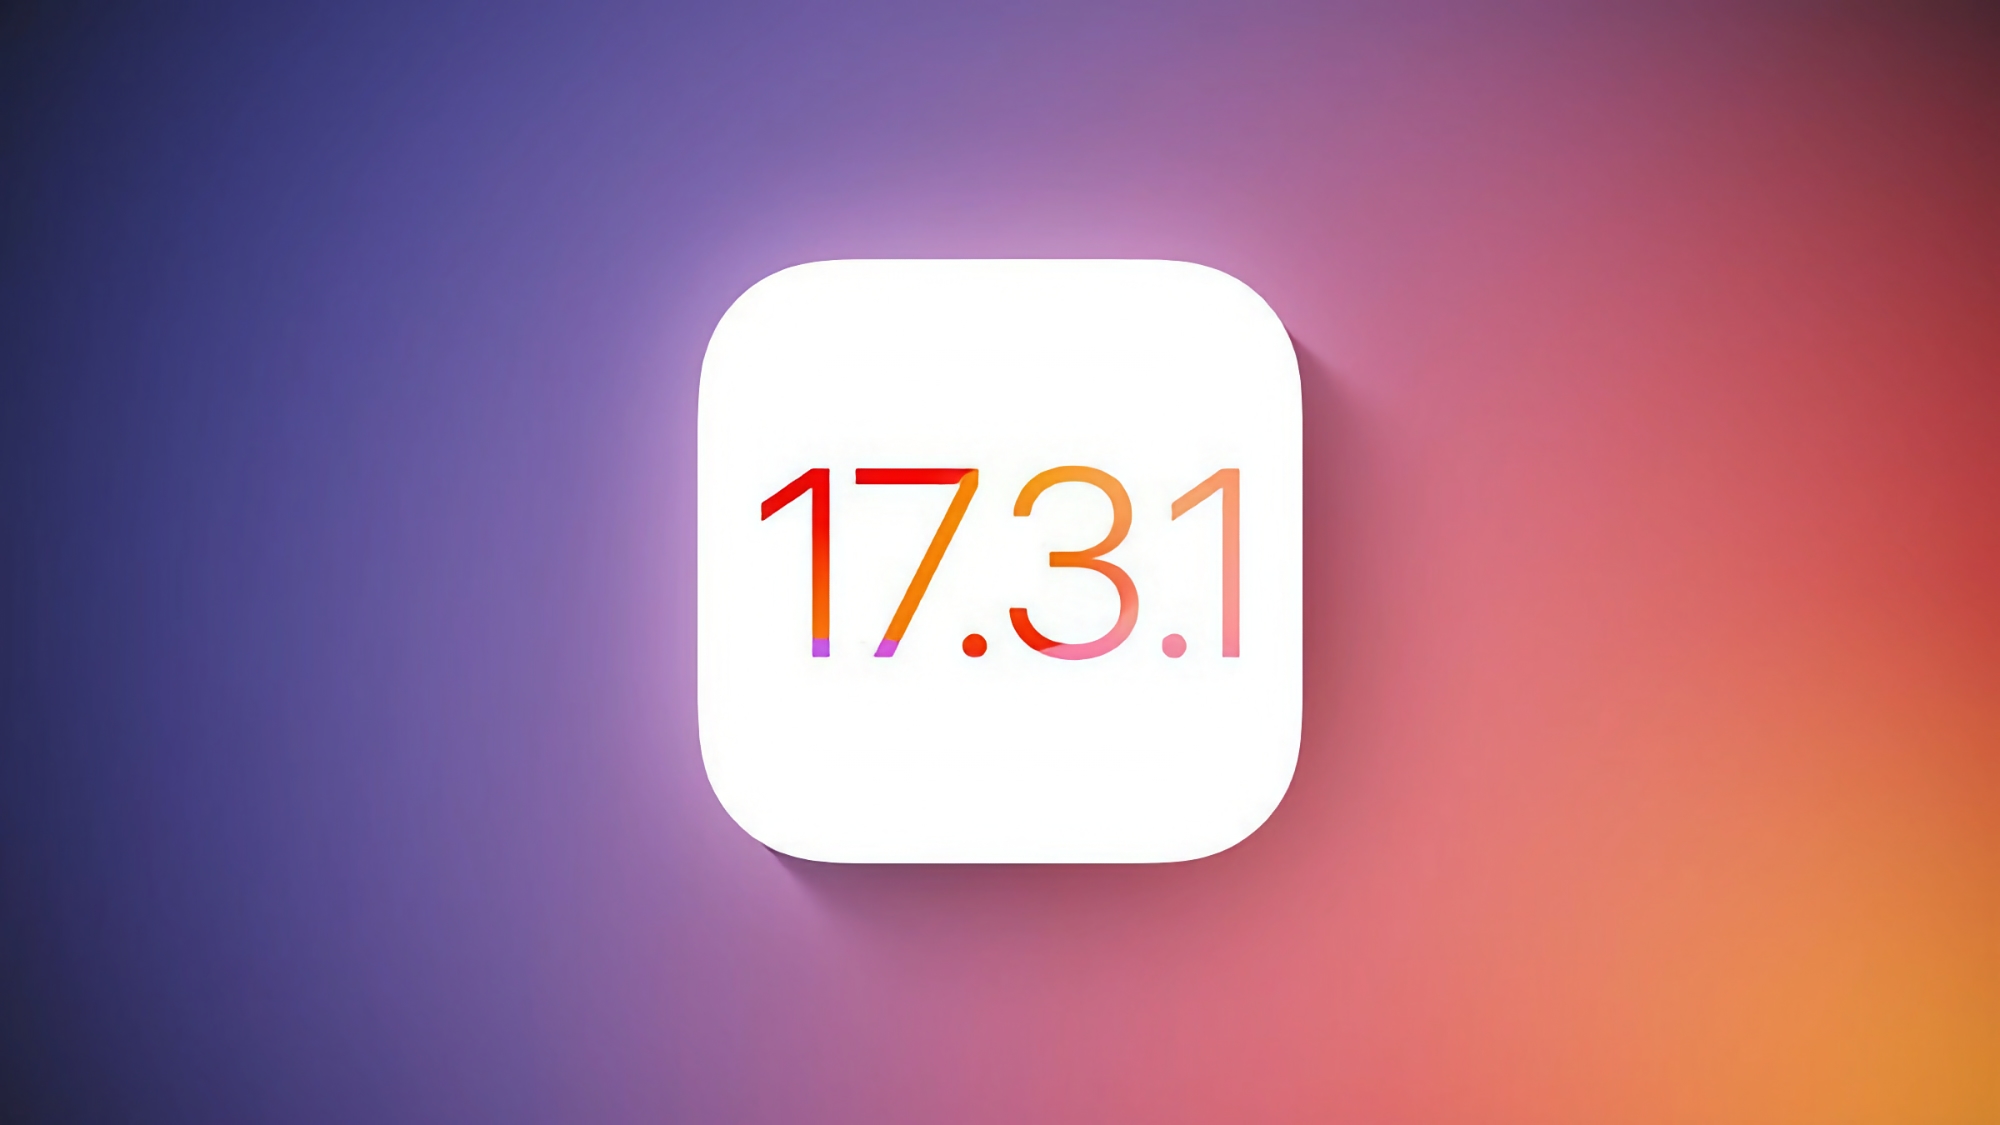 Apple has released iOS 17.3.1 for iPhone users: what's new